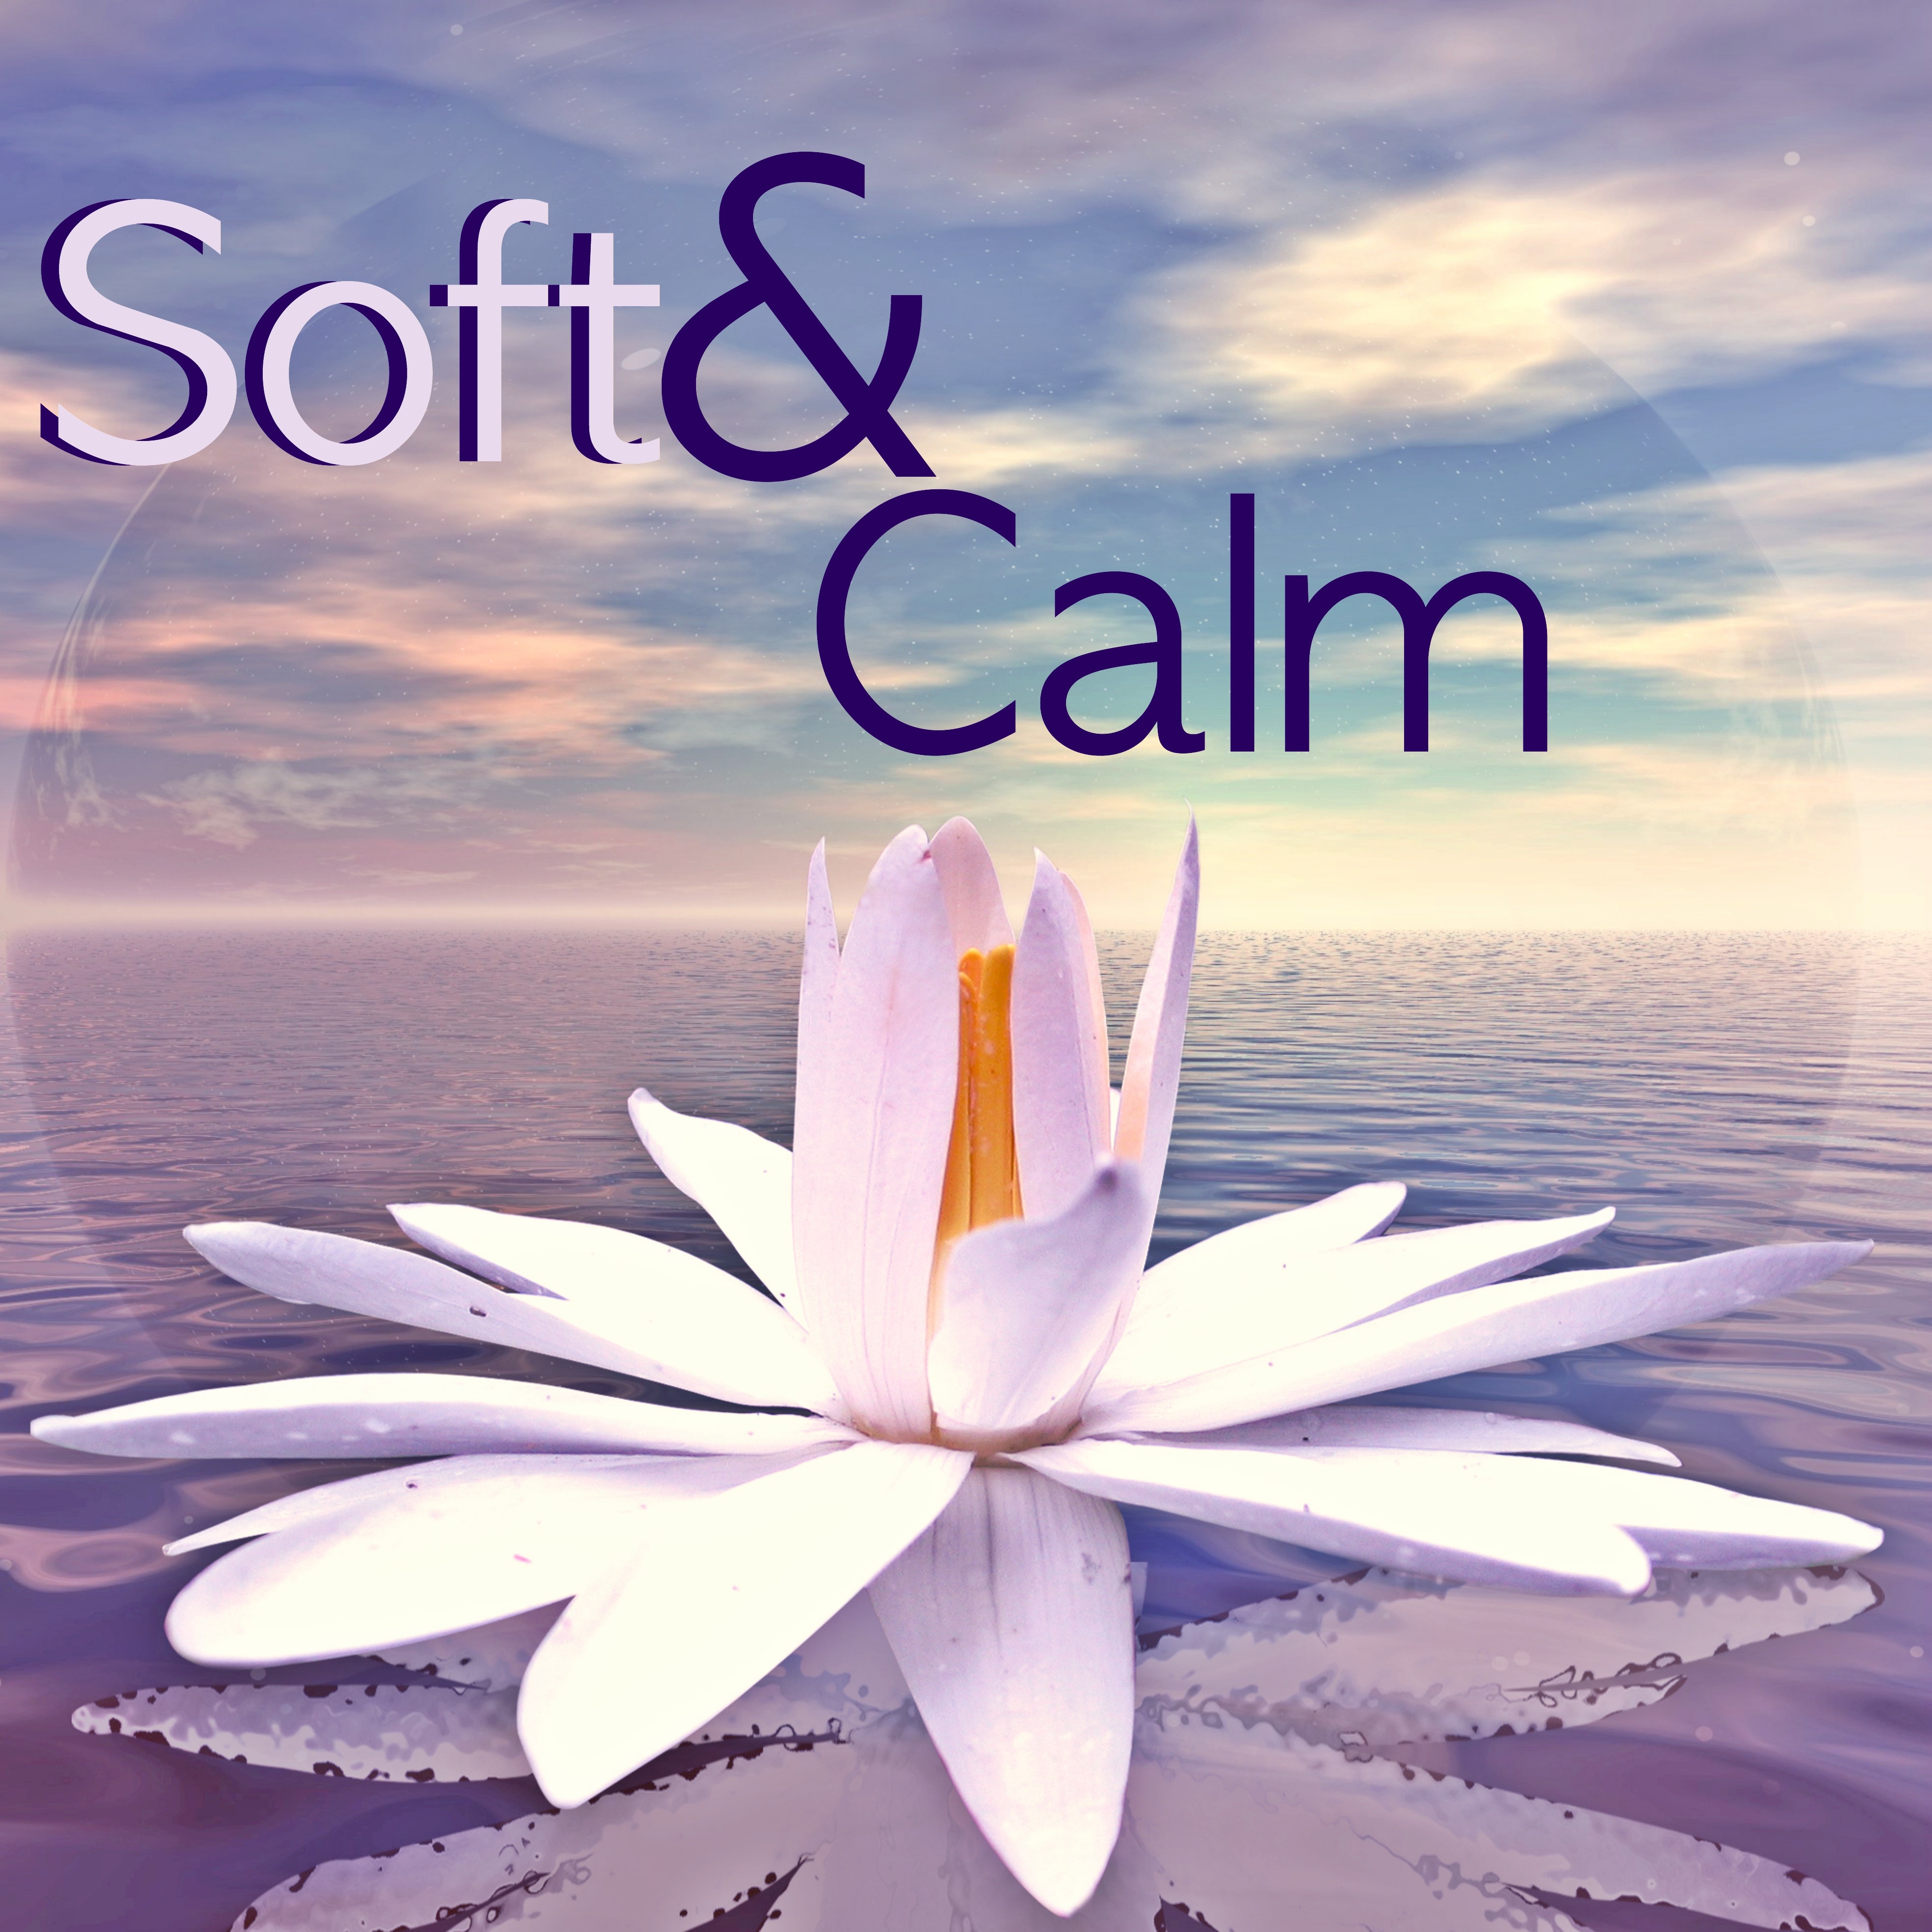 Soft and Calm - Sweet Music for Restful Sleep, Newborns Sleep Aid with Gurgling Stream and Gentle Natural Sounds to Soothe and Heal, Real Sound of Nature for Relaxation